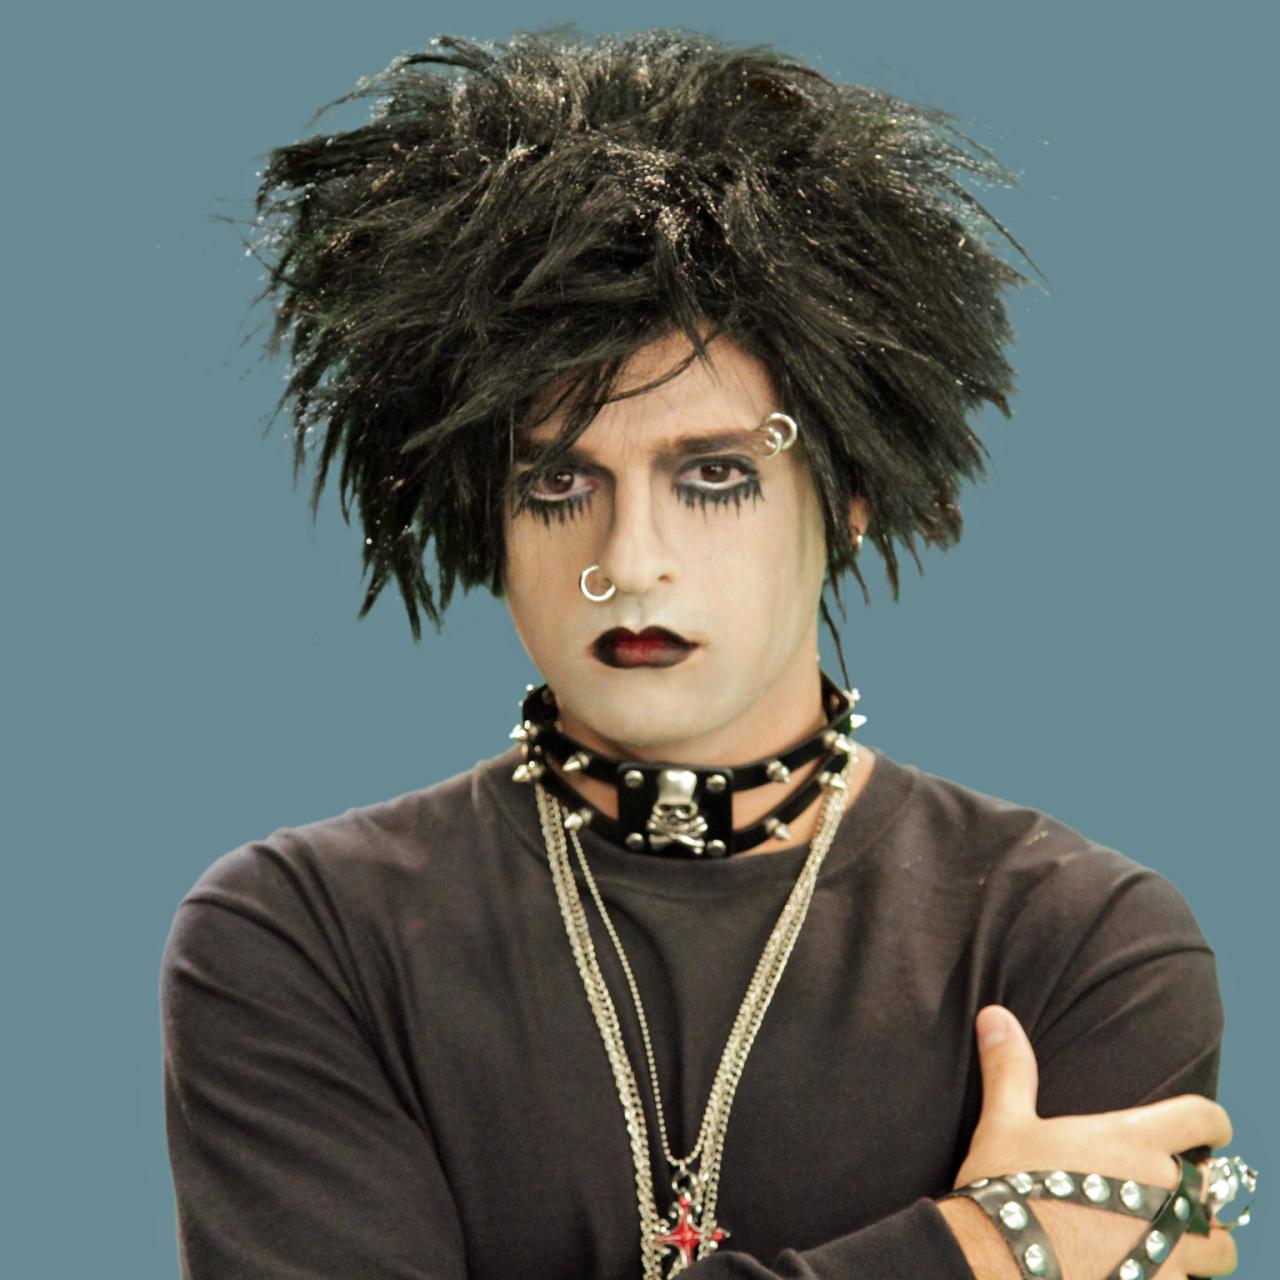 Goth Outfits for Guys- 20 ideas How to Get Goth Look for Men